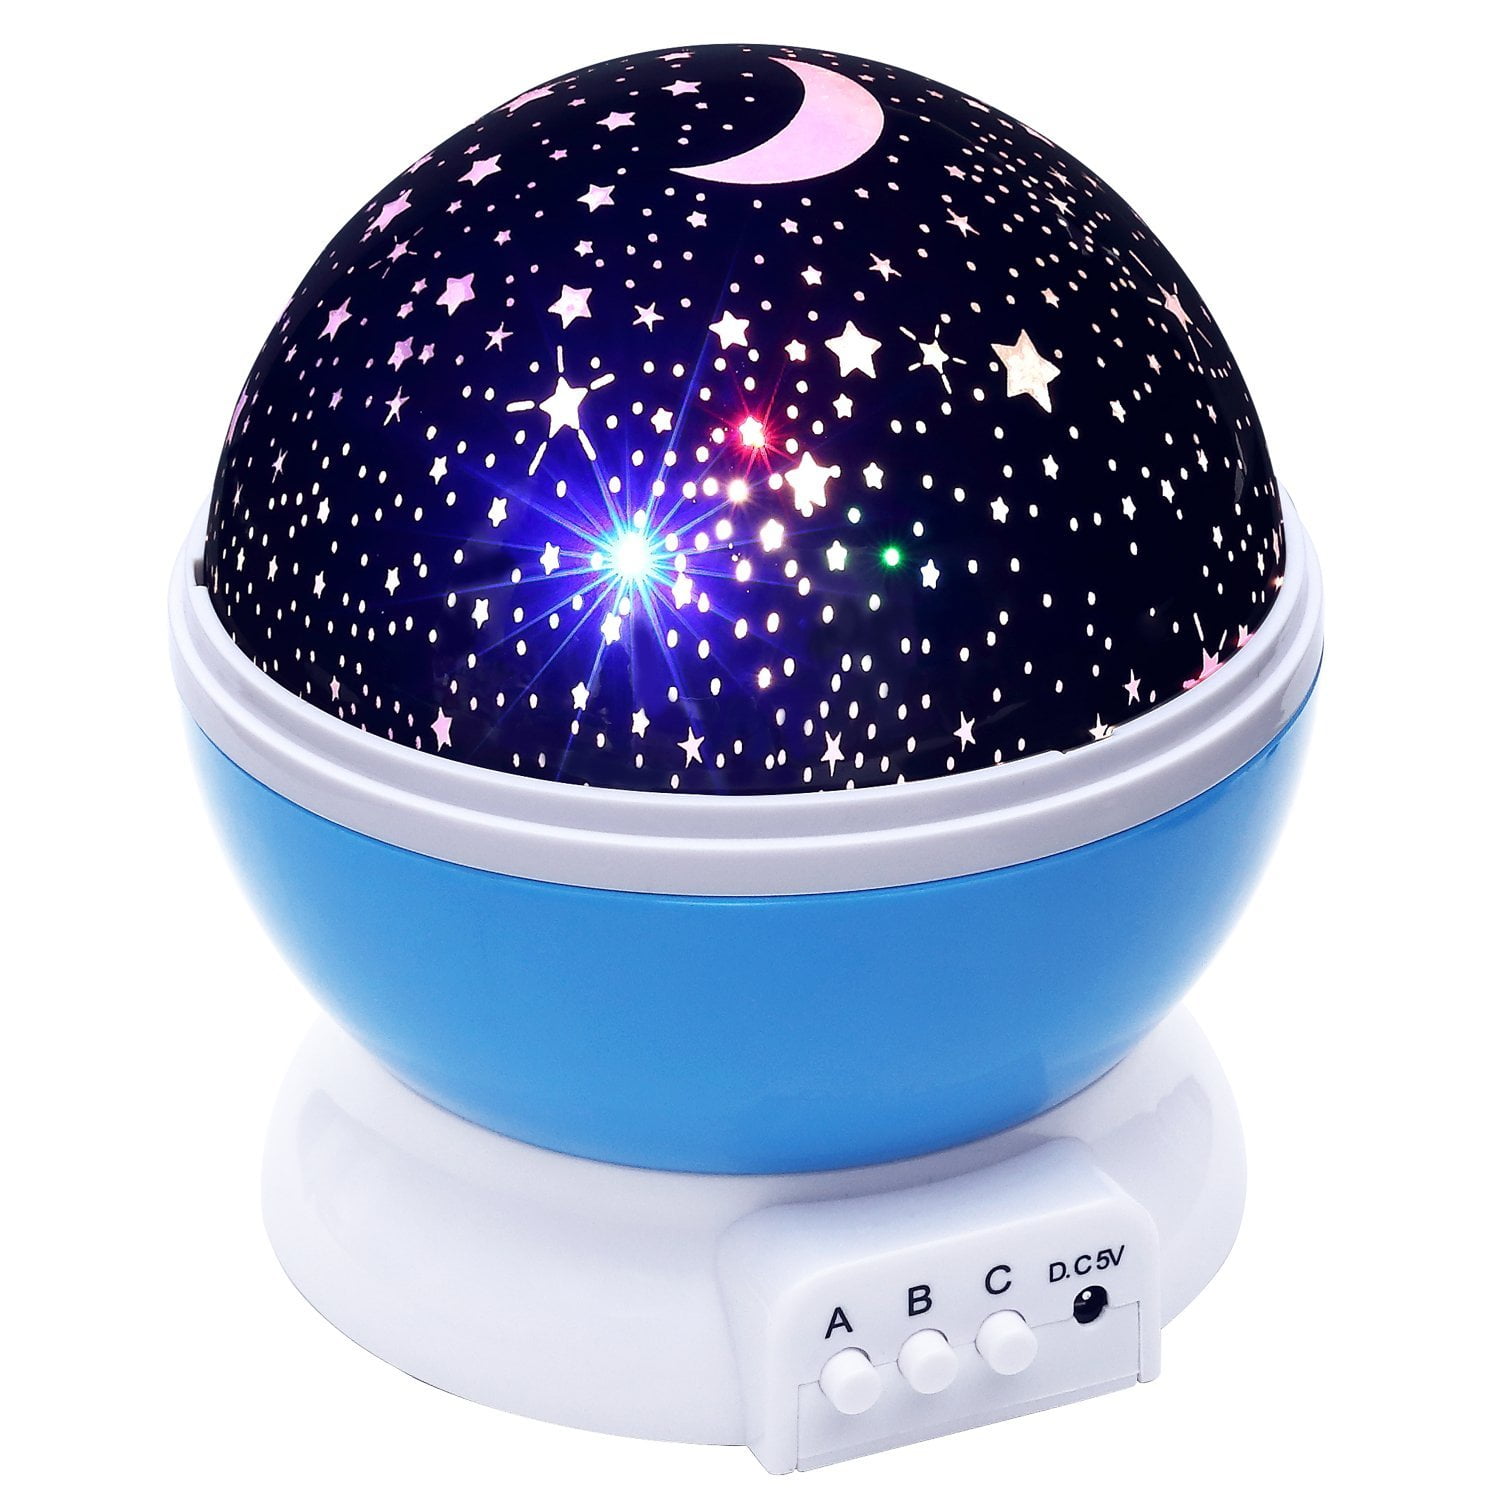 Magic LED Light Projector Star Moon Sky Baby Kid Night Mood Lamp Gift For Party 